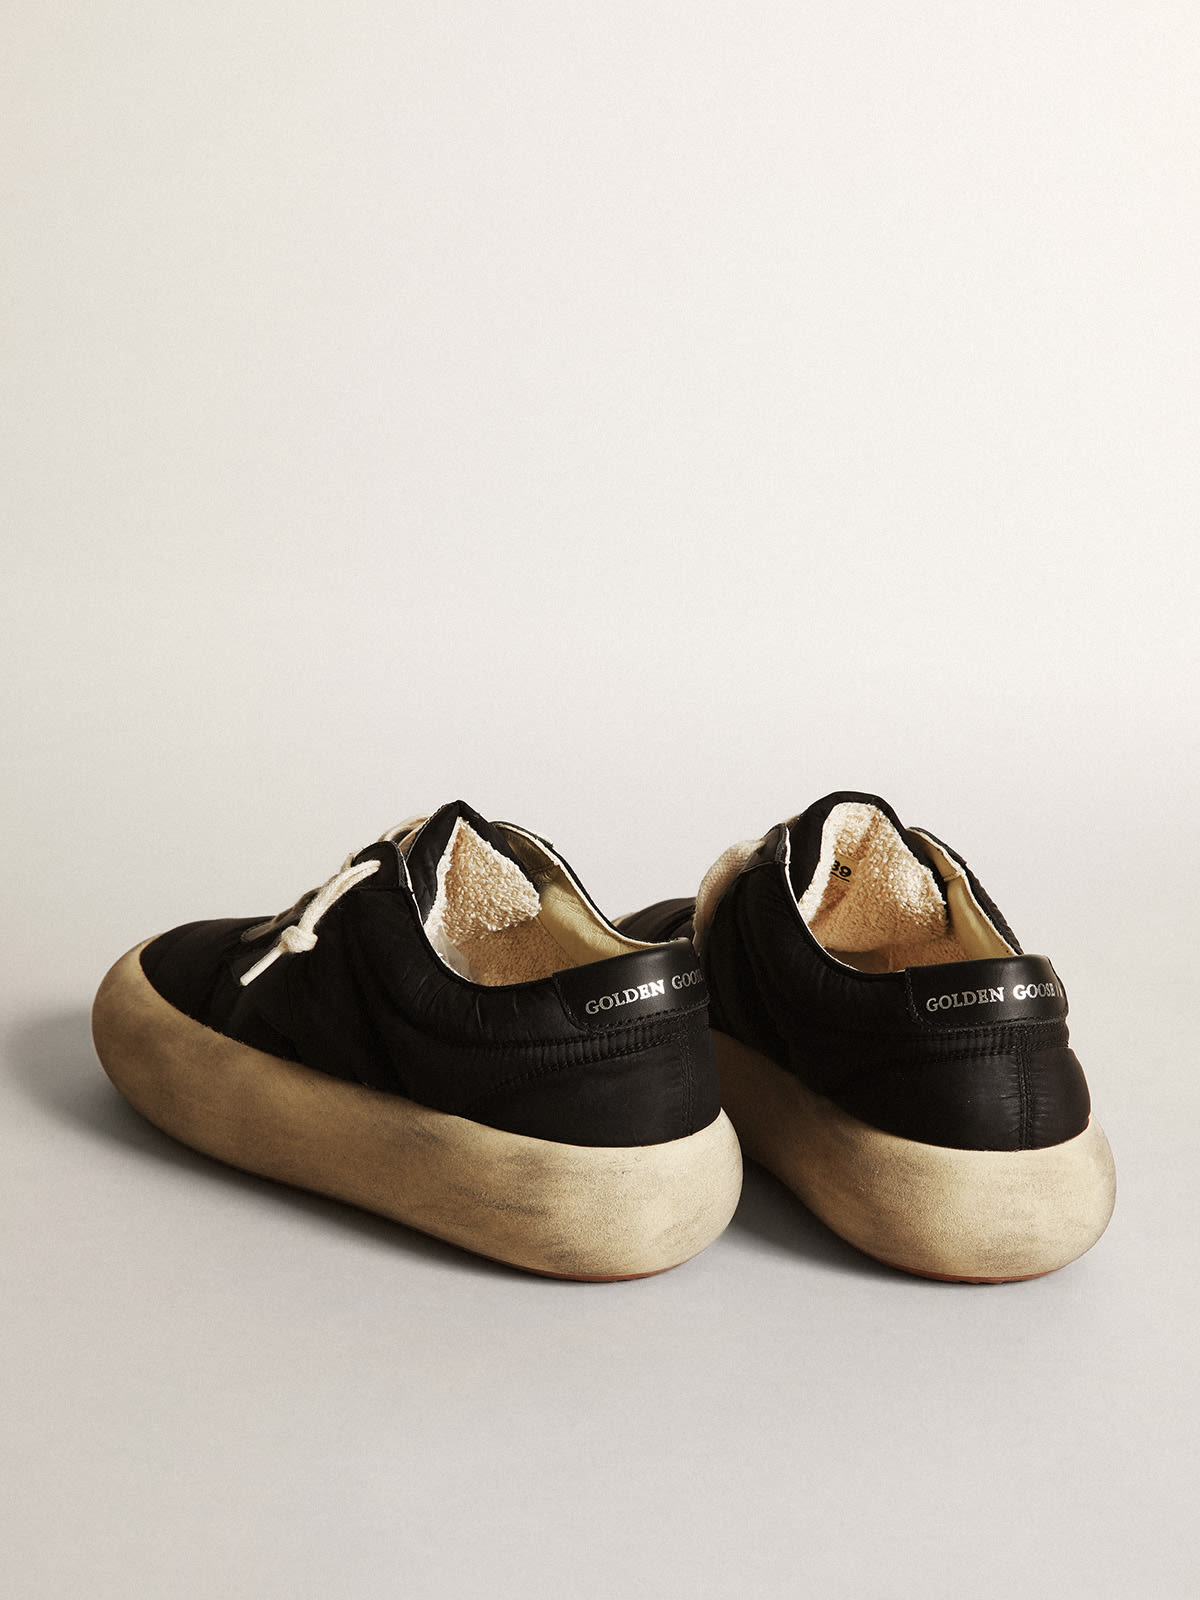 Golden Goose - Space-Star shoes in black nylon with black leather star and heel tab in 